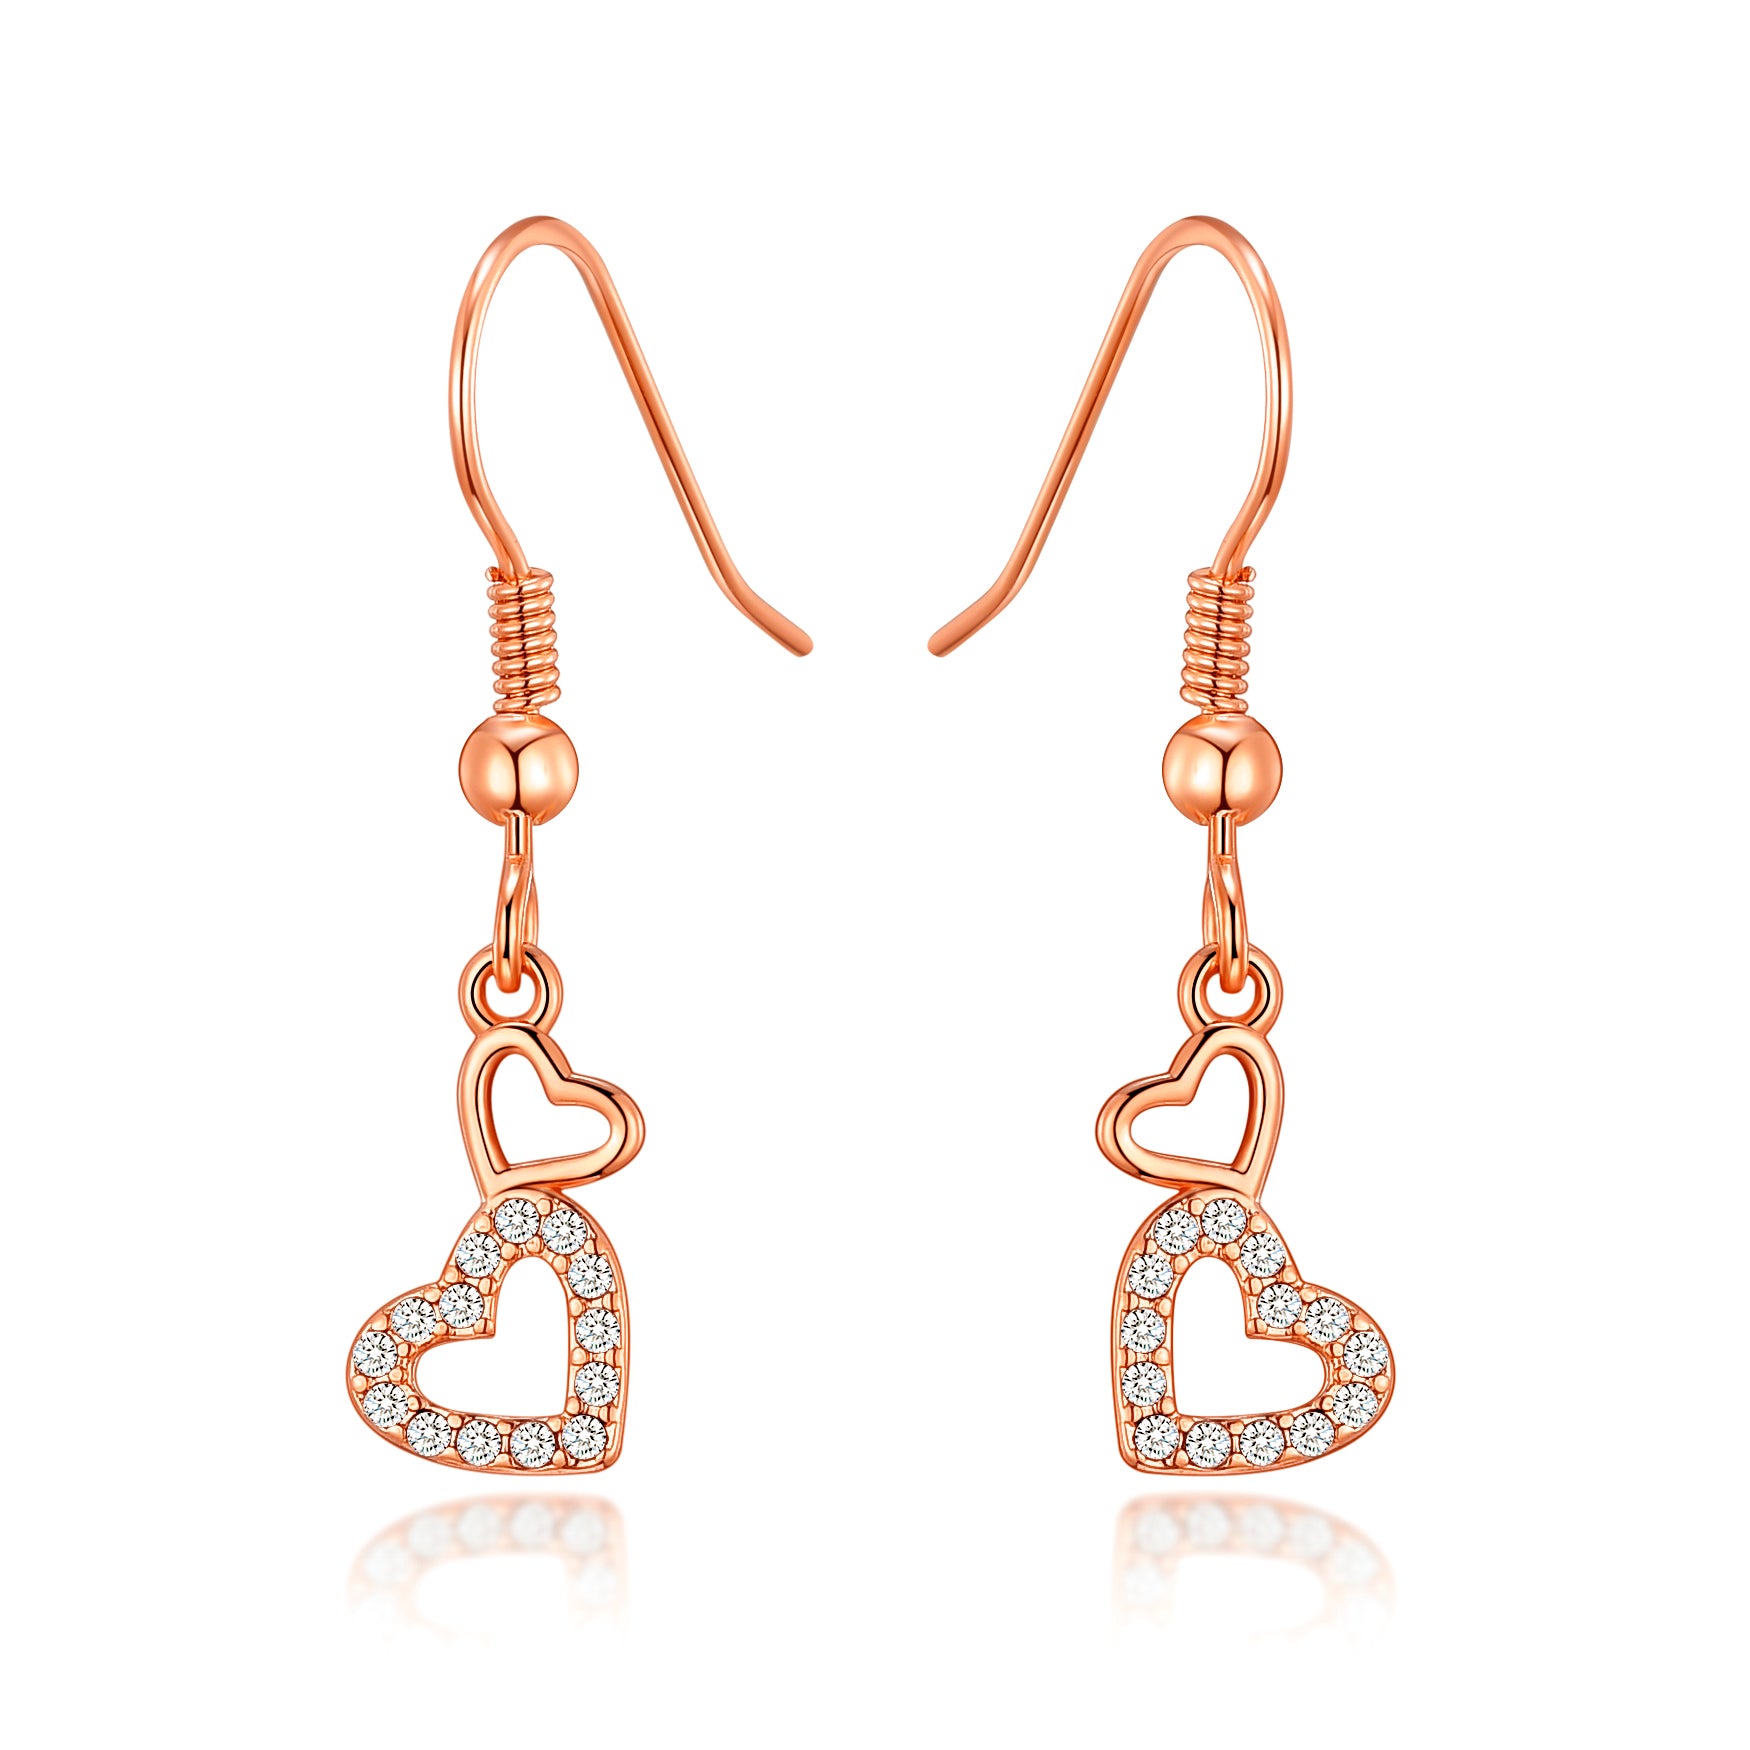 Rose Gold Plated Double Heart Drop Earrings Created with Zircondia® Crystals by Philip Jones Jewellery